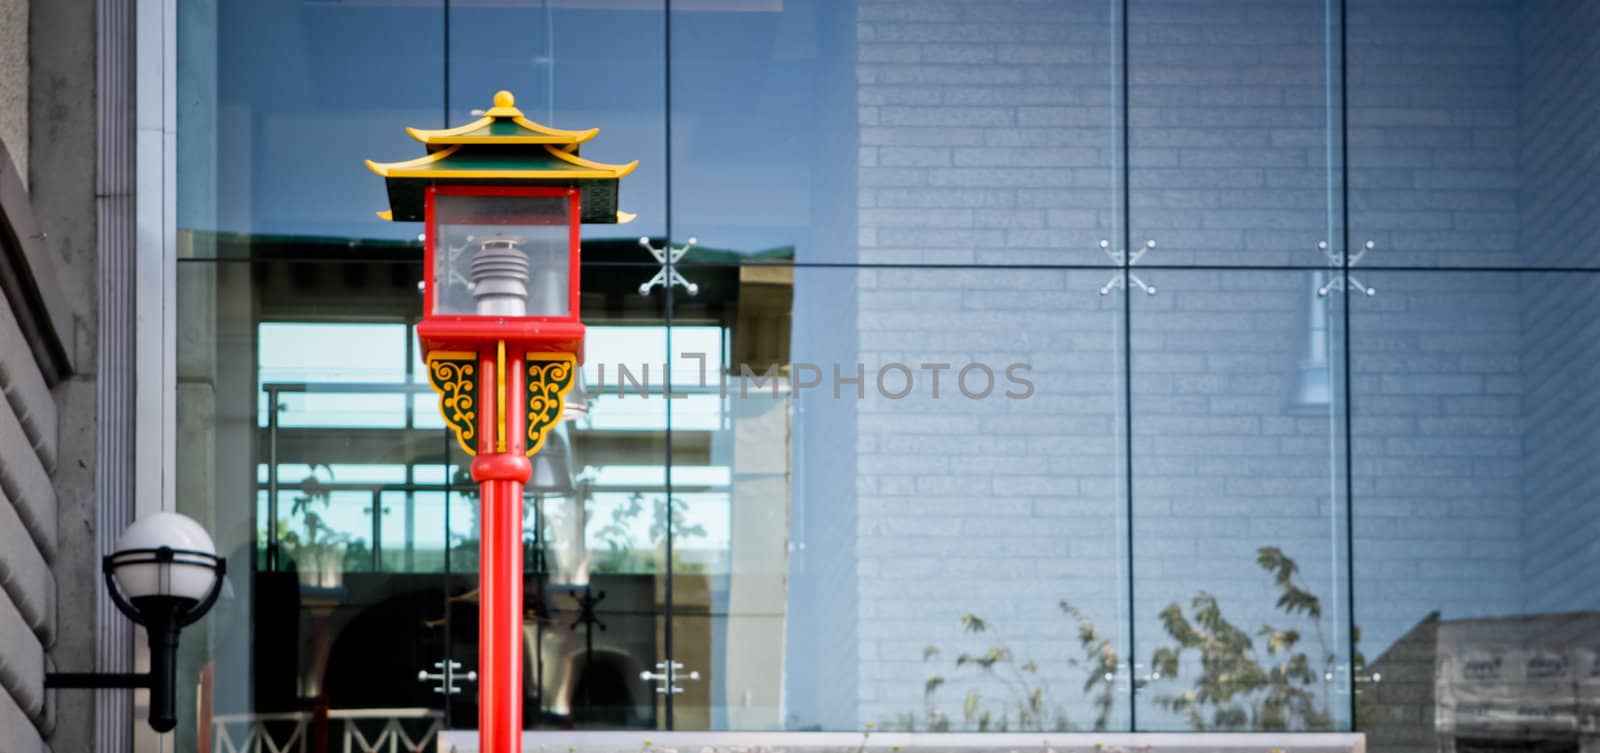 chinese street light i front of modern building